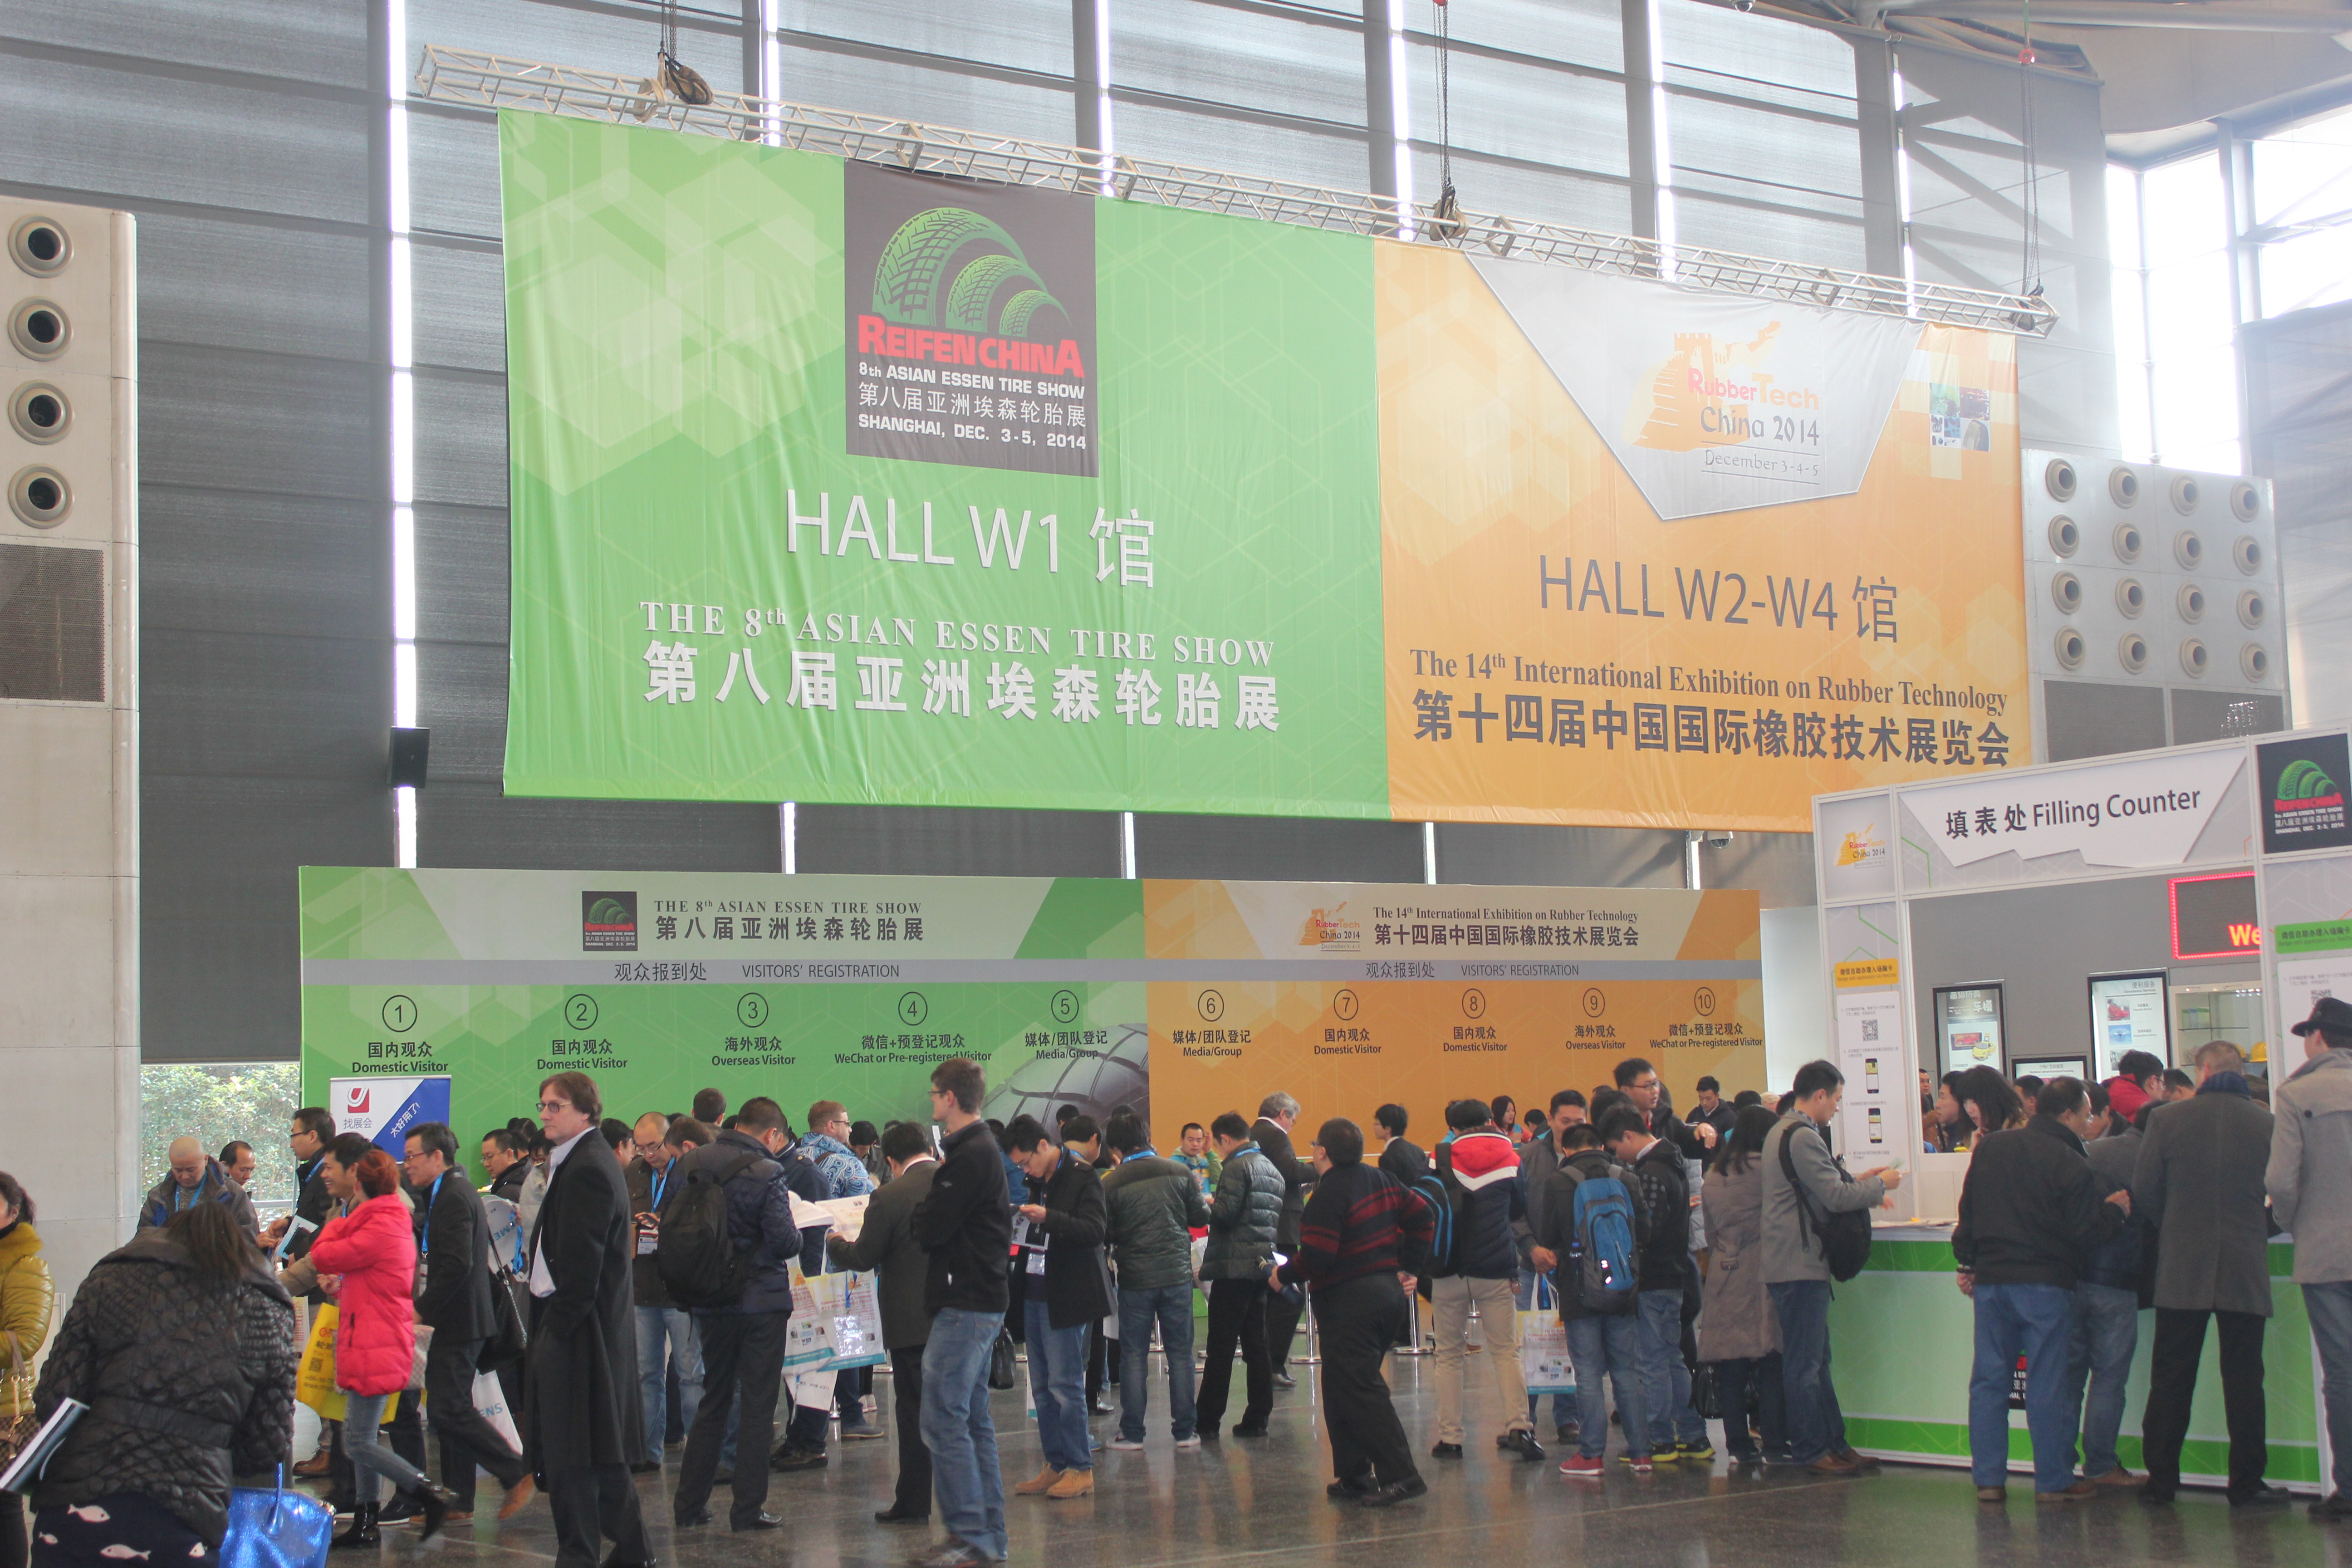 Messe Essen, CURC report increase in visitors to Reifen China 2014